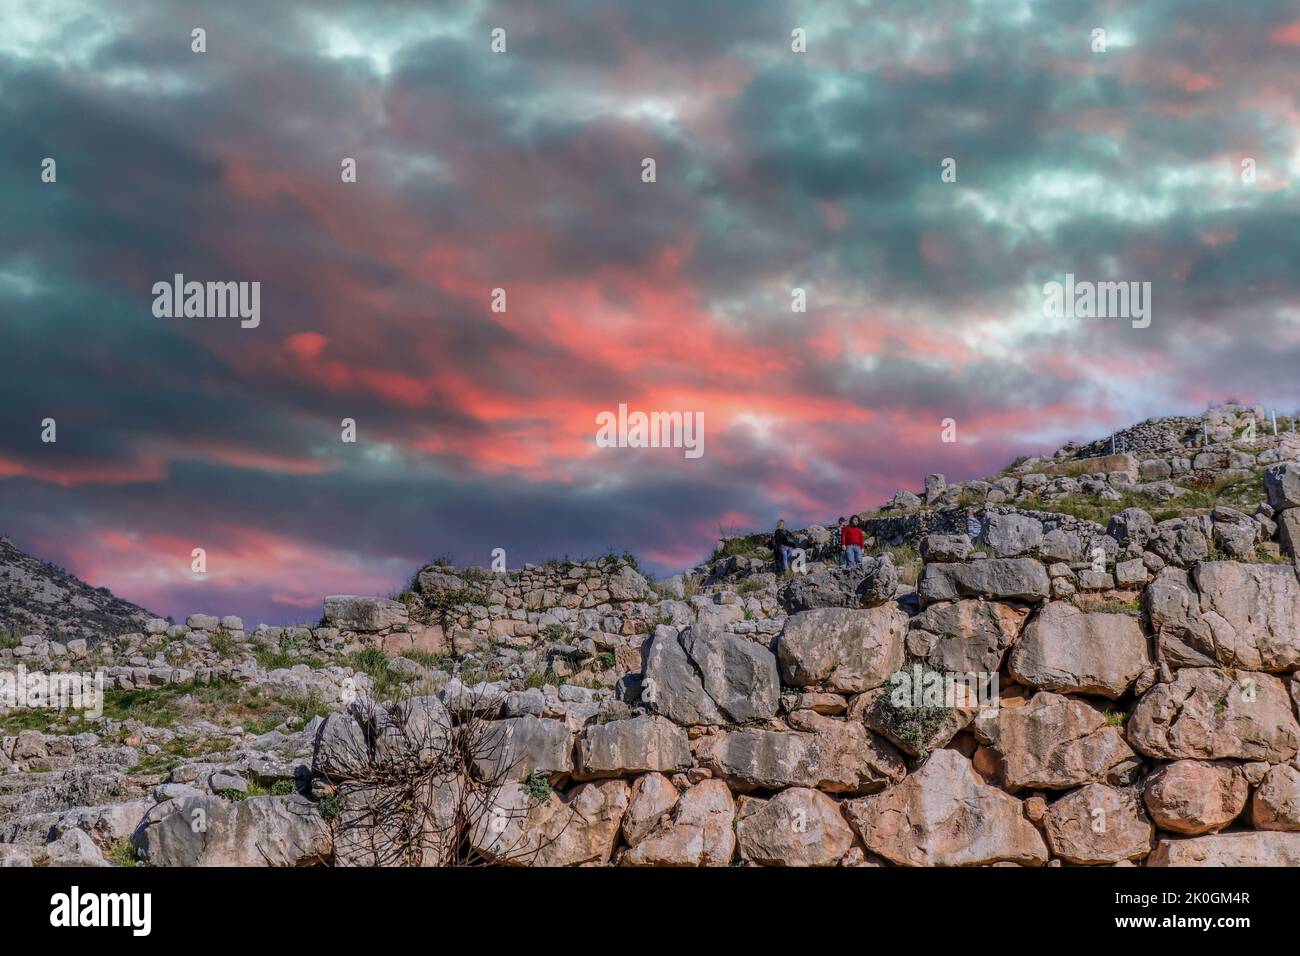 018 01 05  Myceane Greece - Tourists climb the ancient walls that myth claims were built by giants under firey sunset sky -  Archelogical finds here p Stock Photo